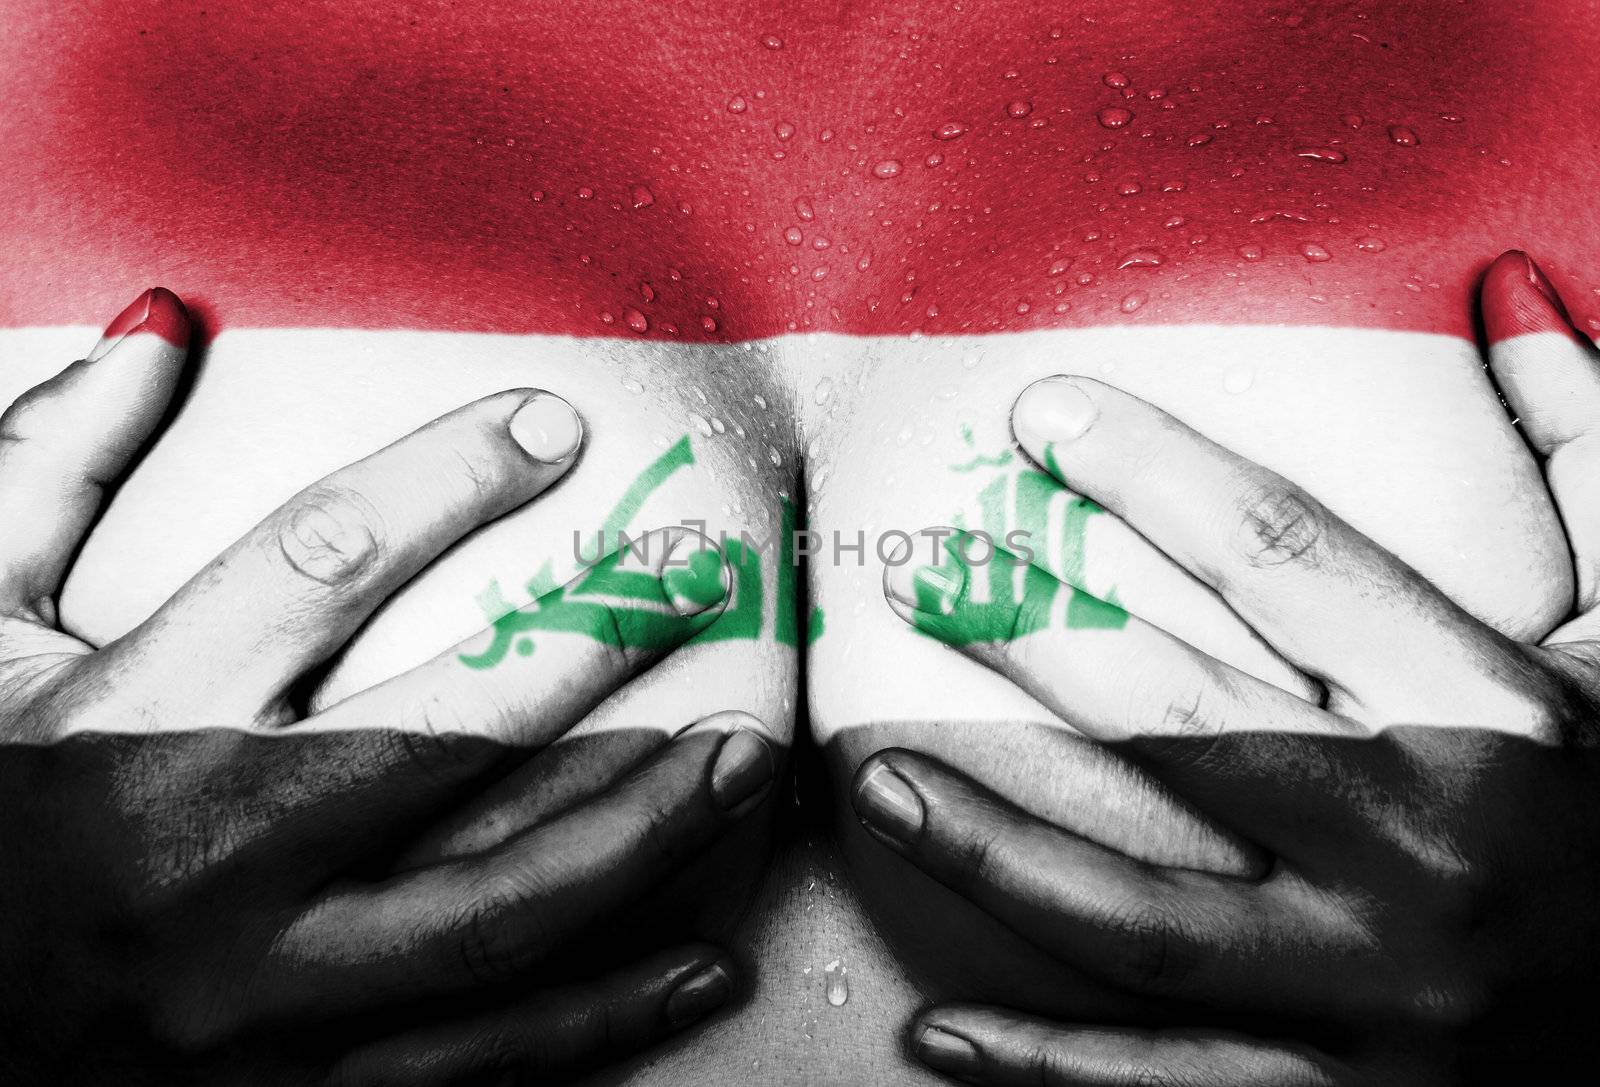 Sweaty upper part of female body, hands covering breasts, flag of Iraq